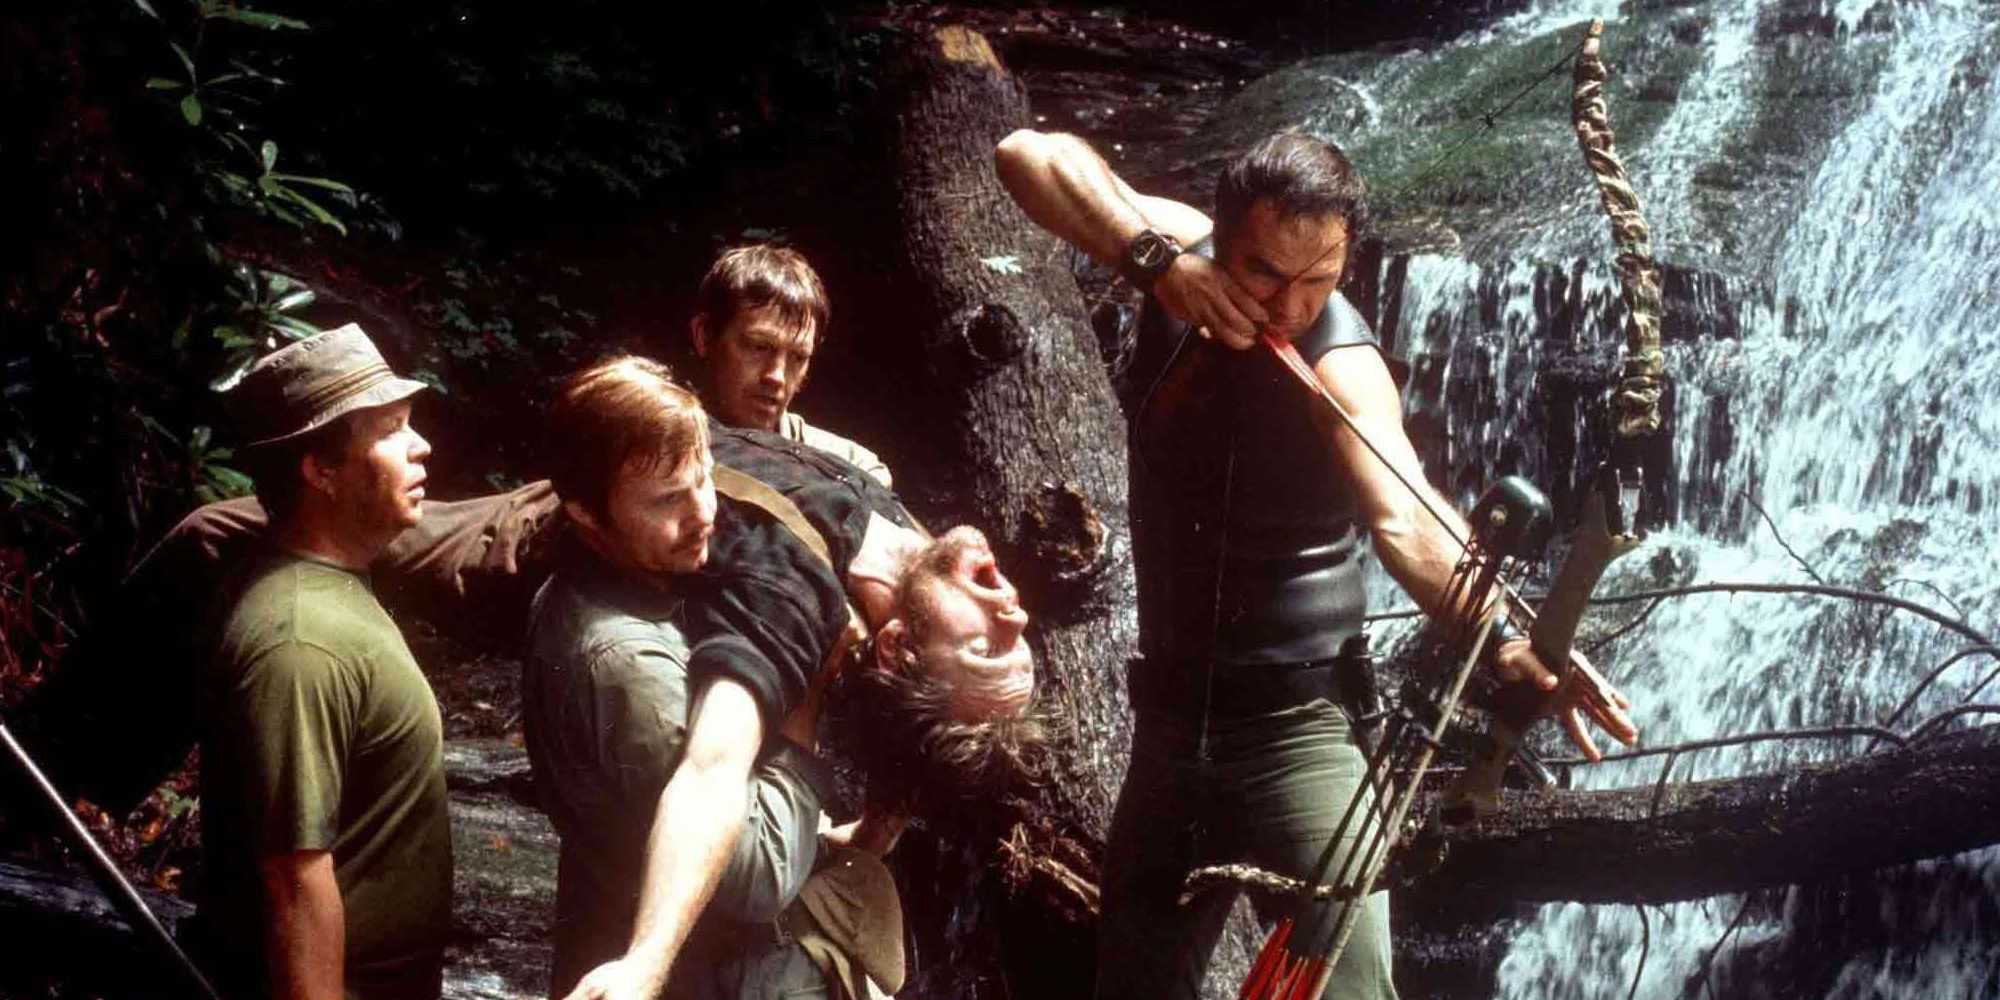 Lewis about to fire his bow while his friends look on in Deliverance